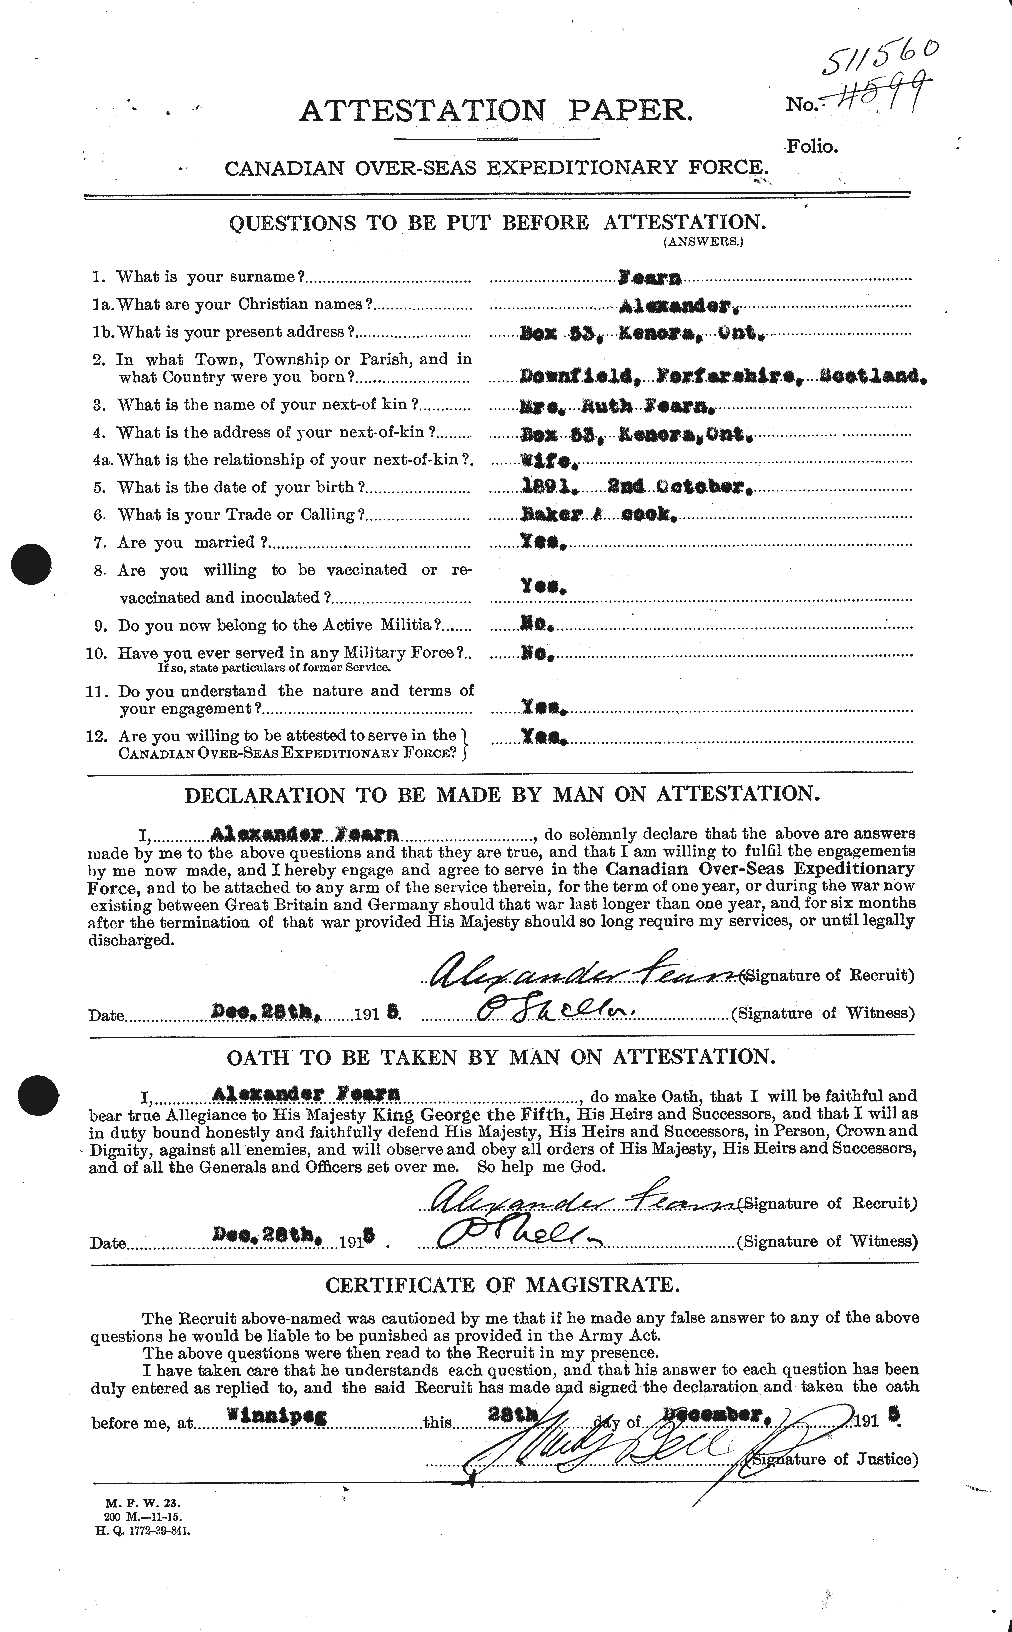 Personnel Records of the First World War - CEF 319563a